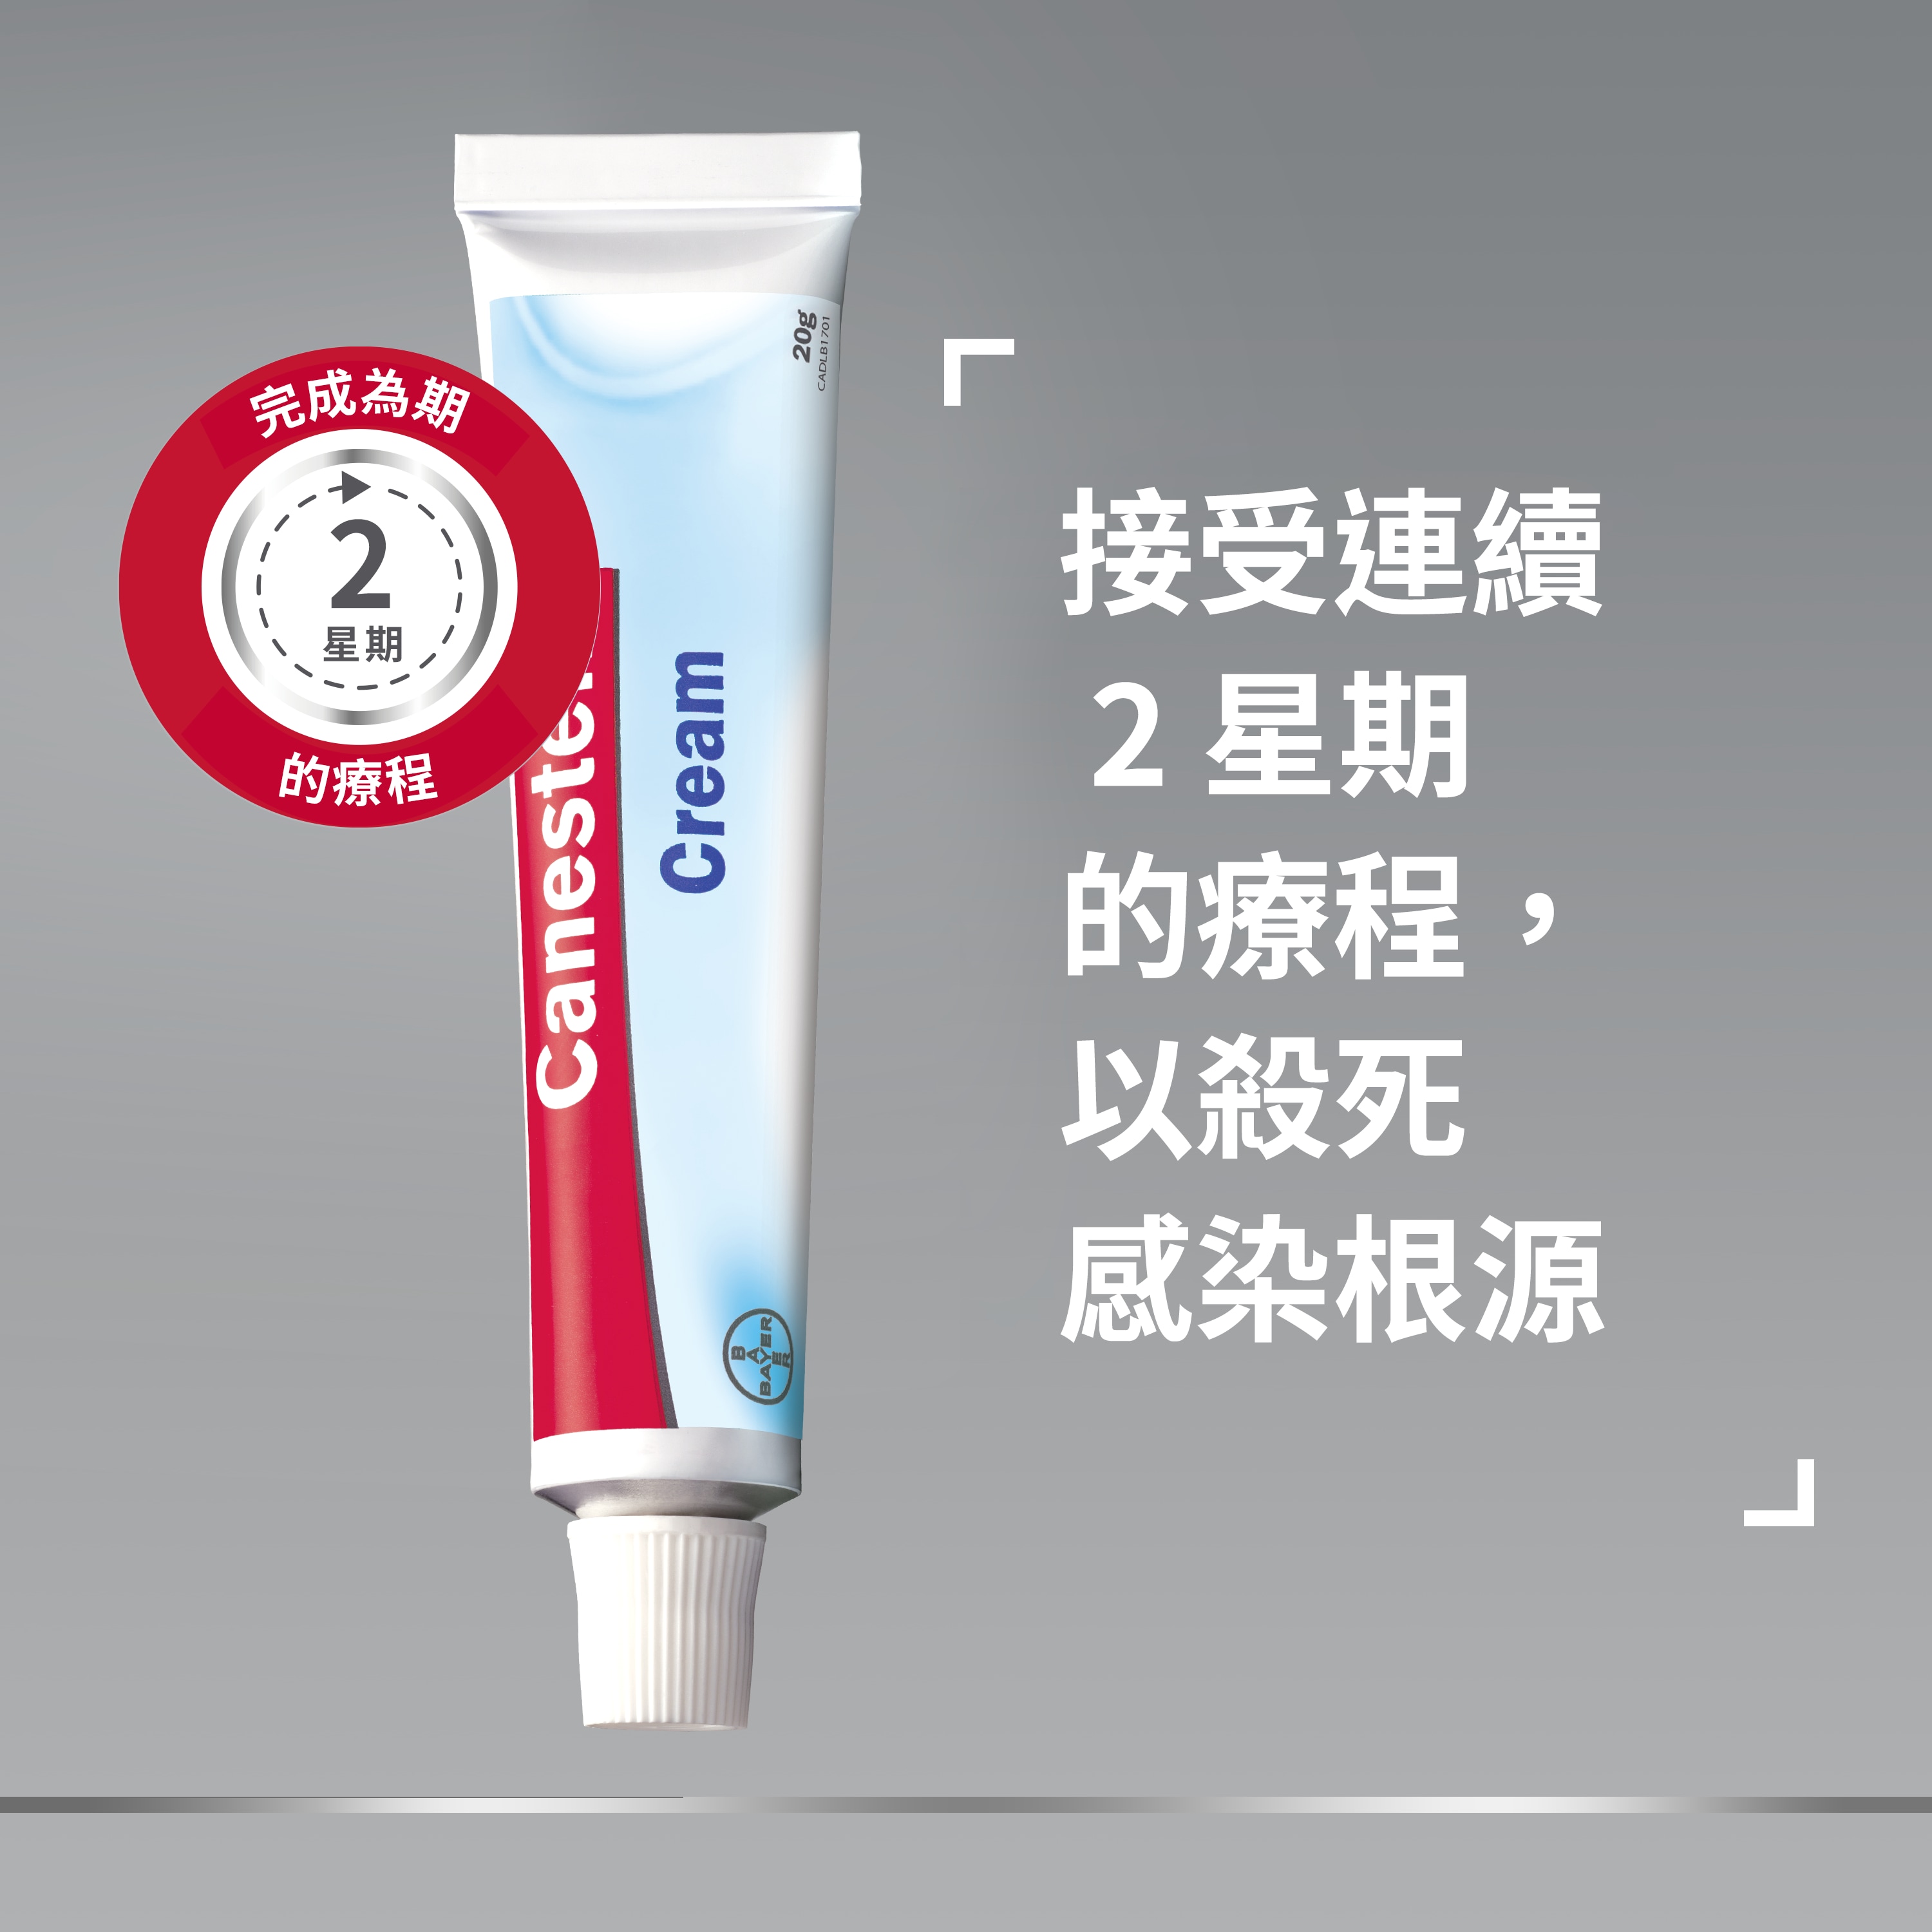 Canesten Antifungal Cream with badge on top saying: Complete 2 weeks treatment, and caption on the right: Continue treatment for 2 weeks to kill the root of the infection 